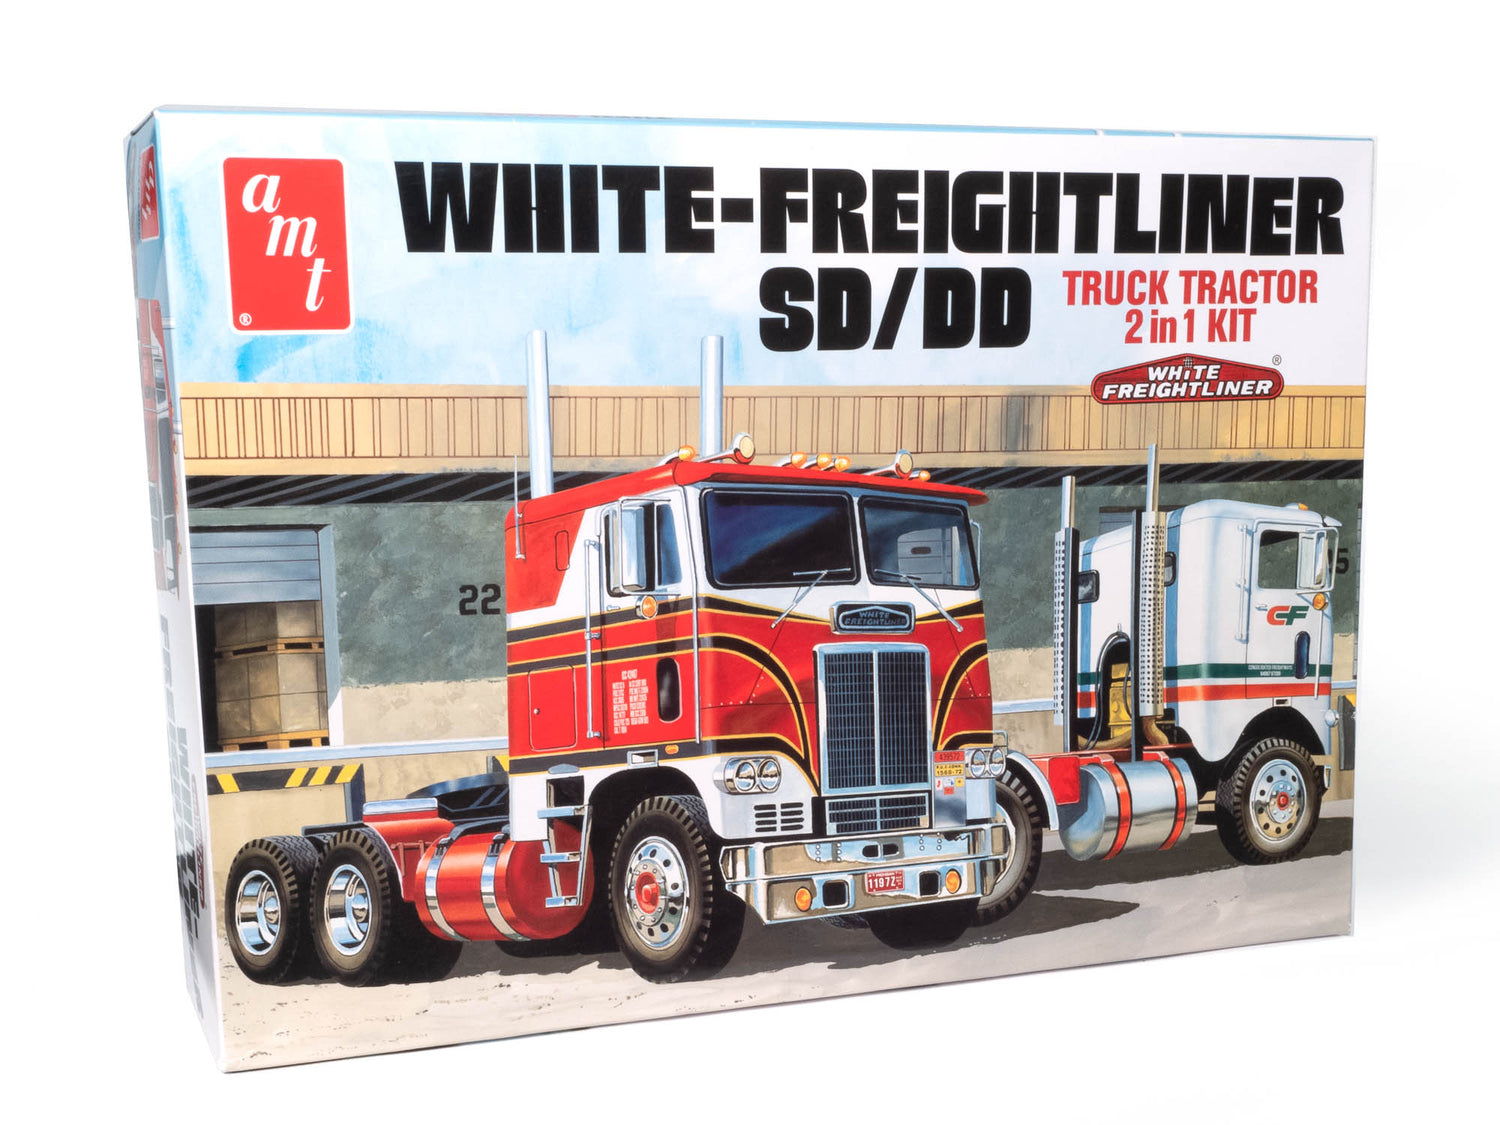 AMT White Freightliner 2-in-1 SD-DD Cabover Tractor (75th Anniversary) 1:25 Scale Model Kit